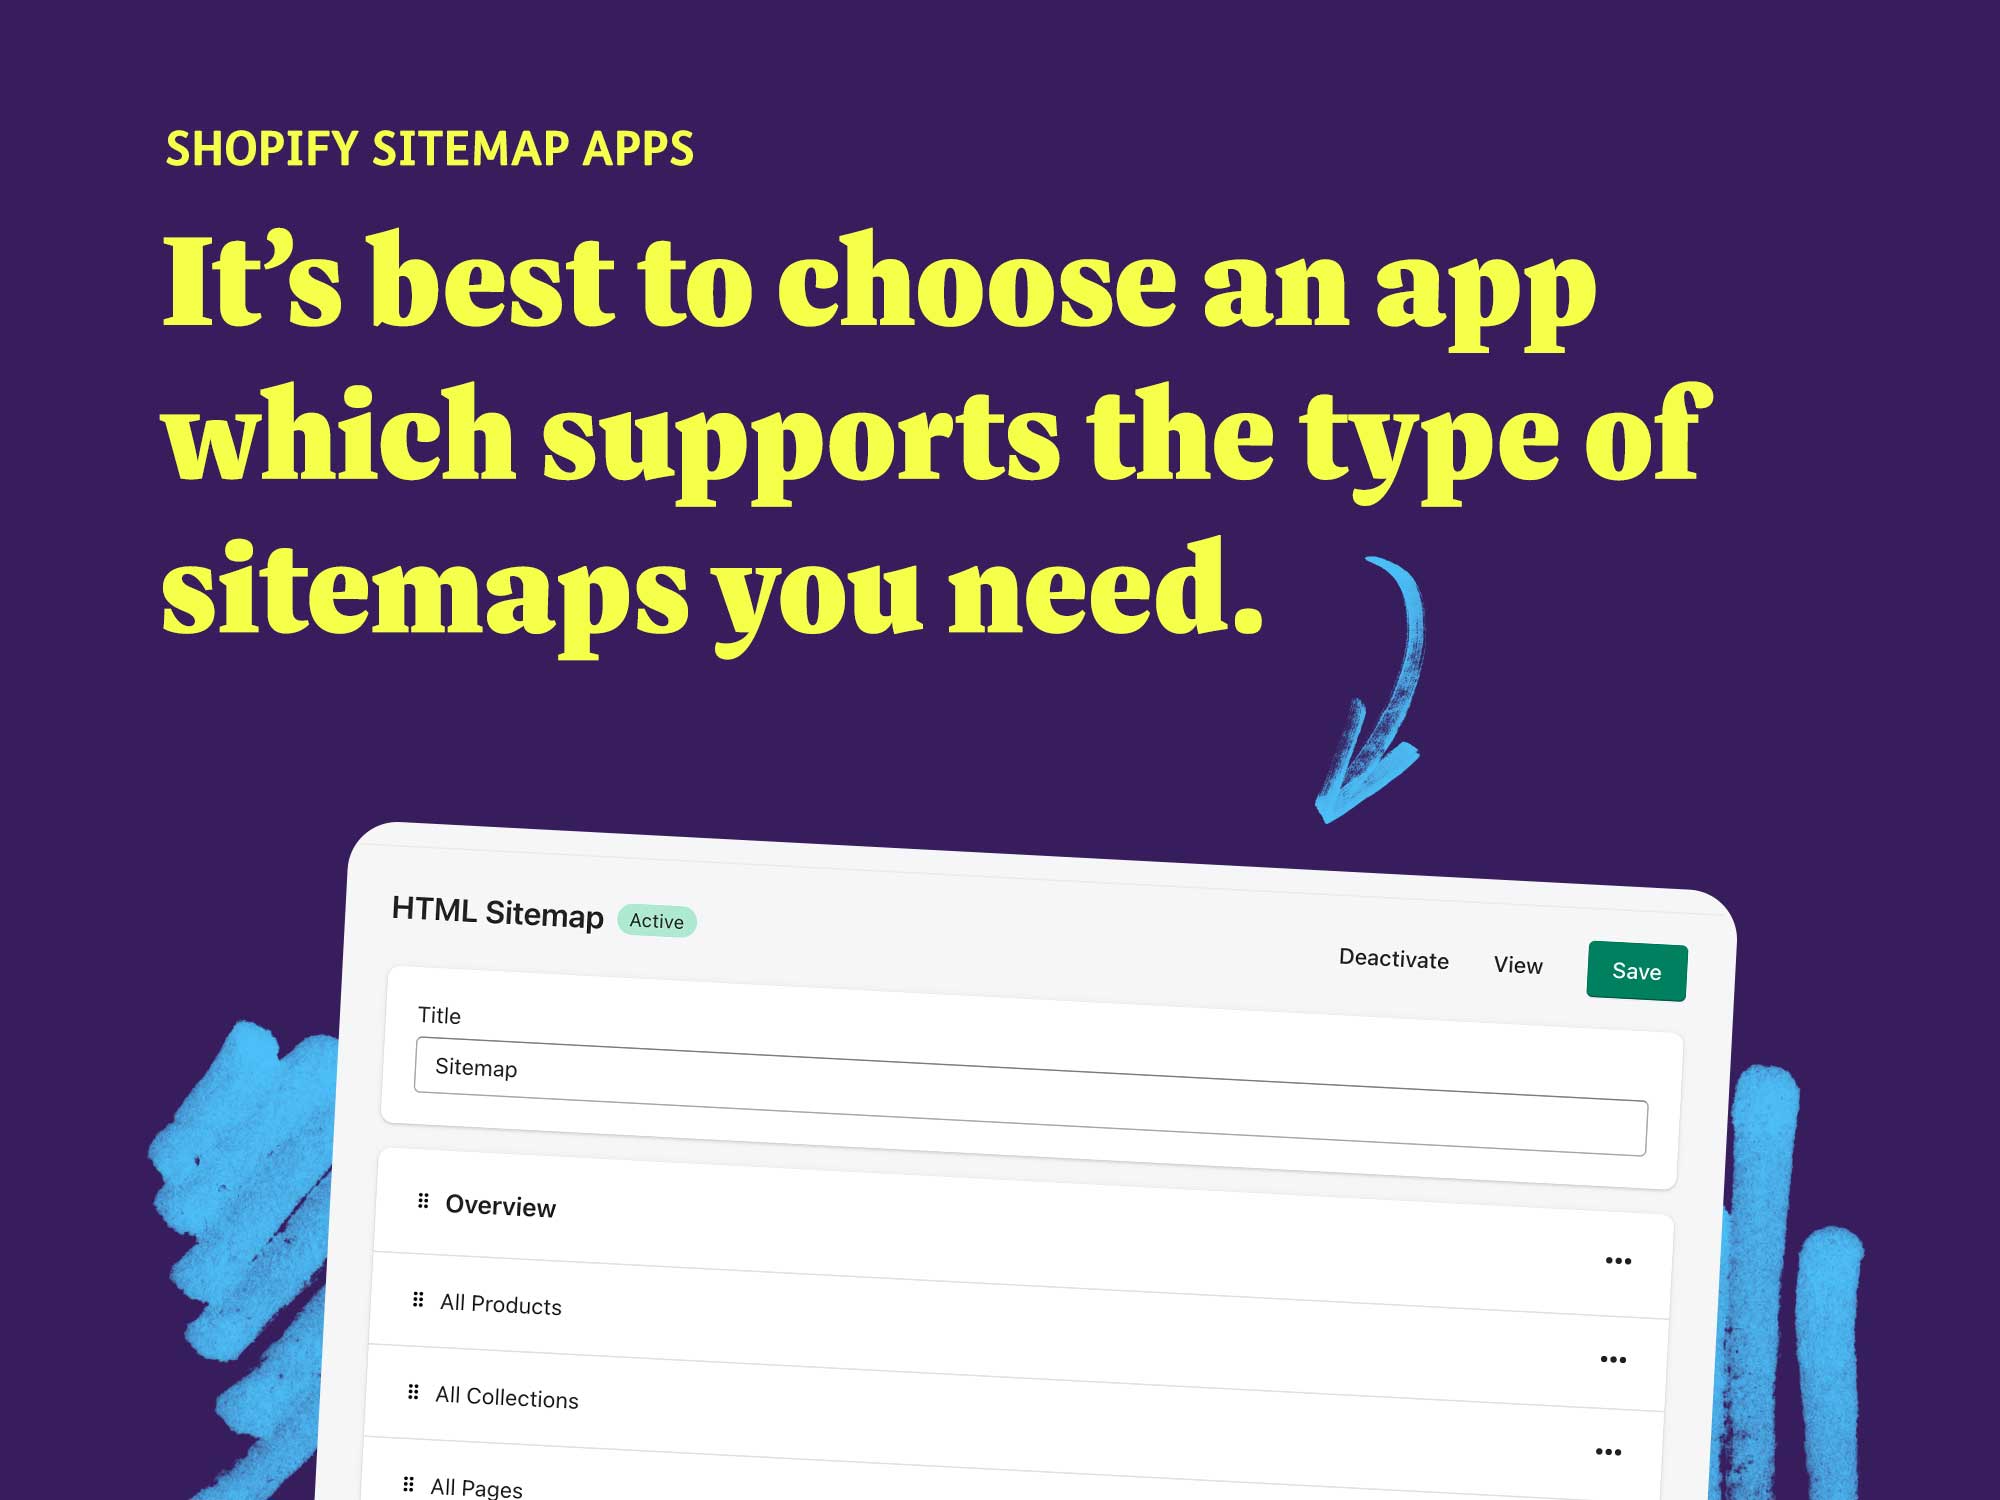 Shopify sitemap apps: It’s best to choose an app which supports the type of sitemaps you need.